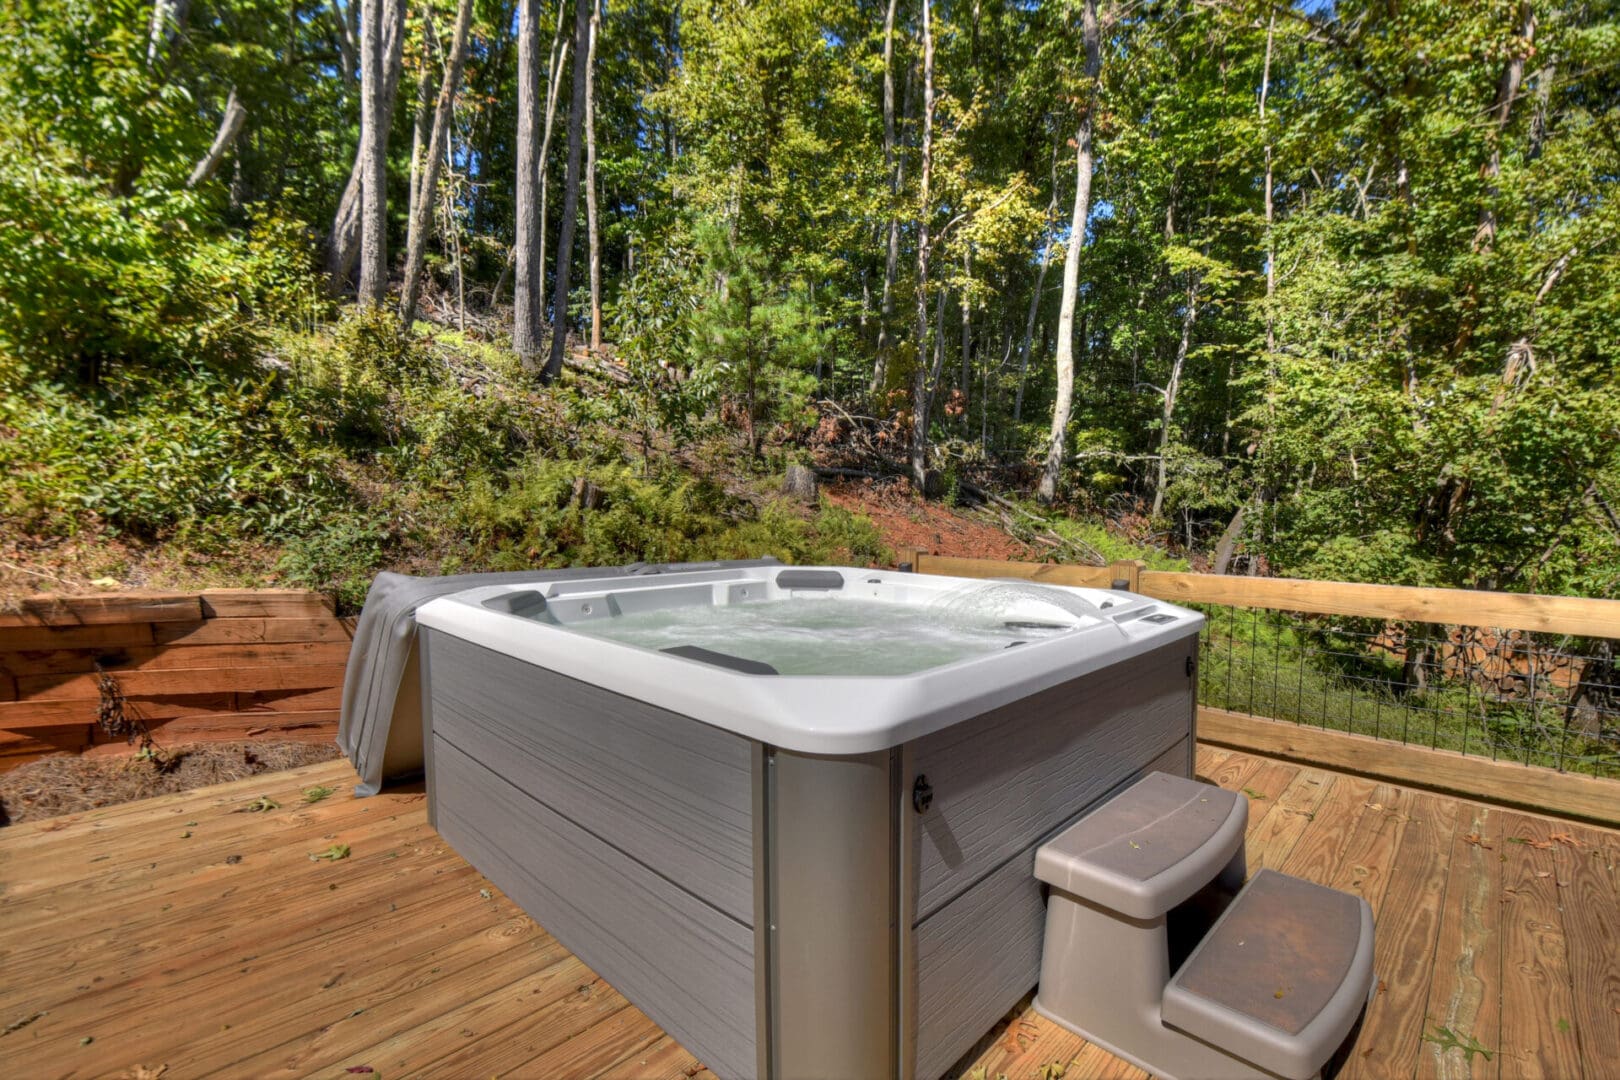 Architectural Design services: A luxurious hot tub beautifully placed on a deck amidst the serene woods.